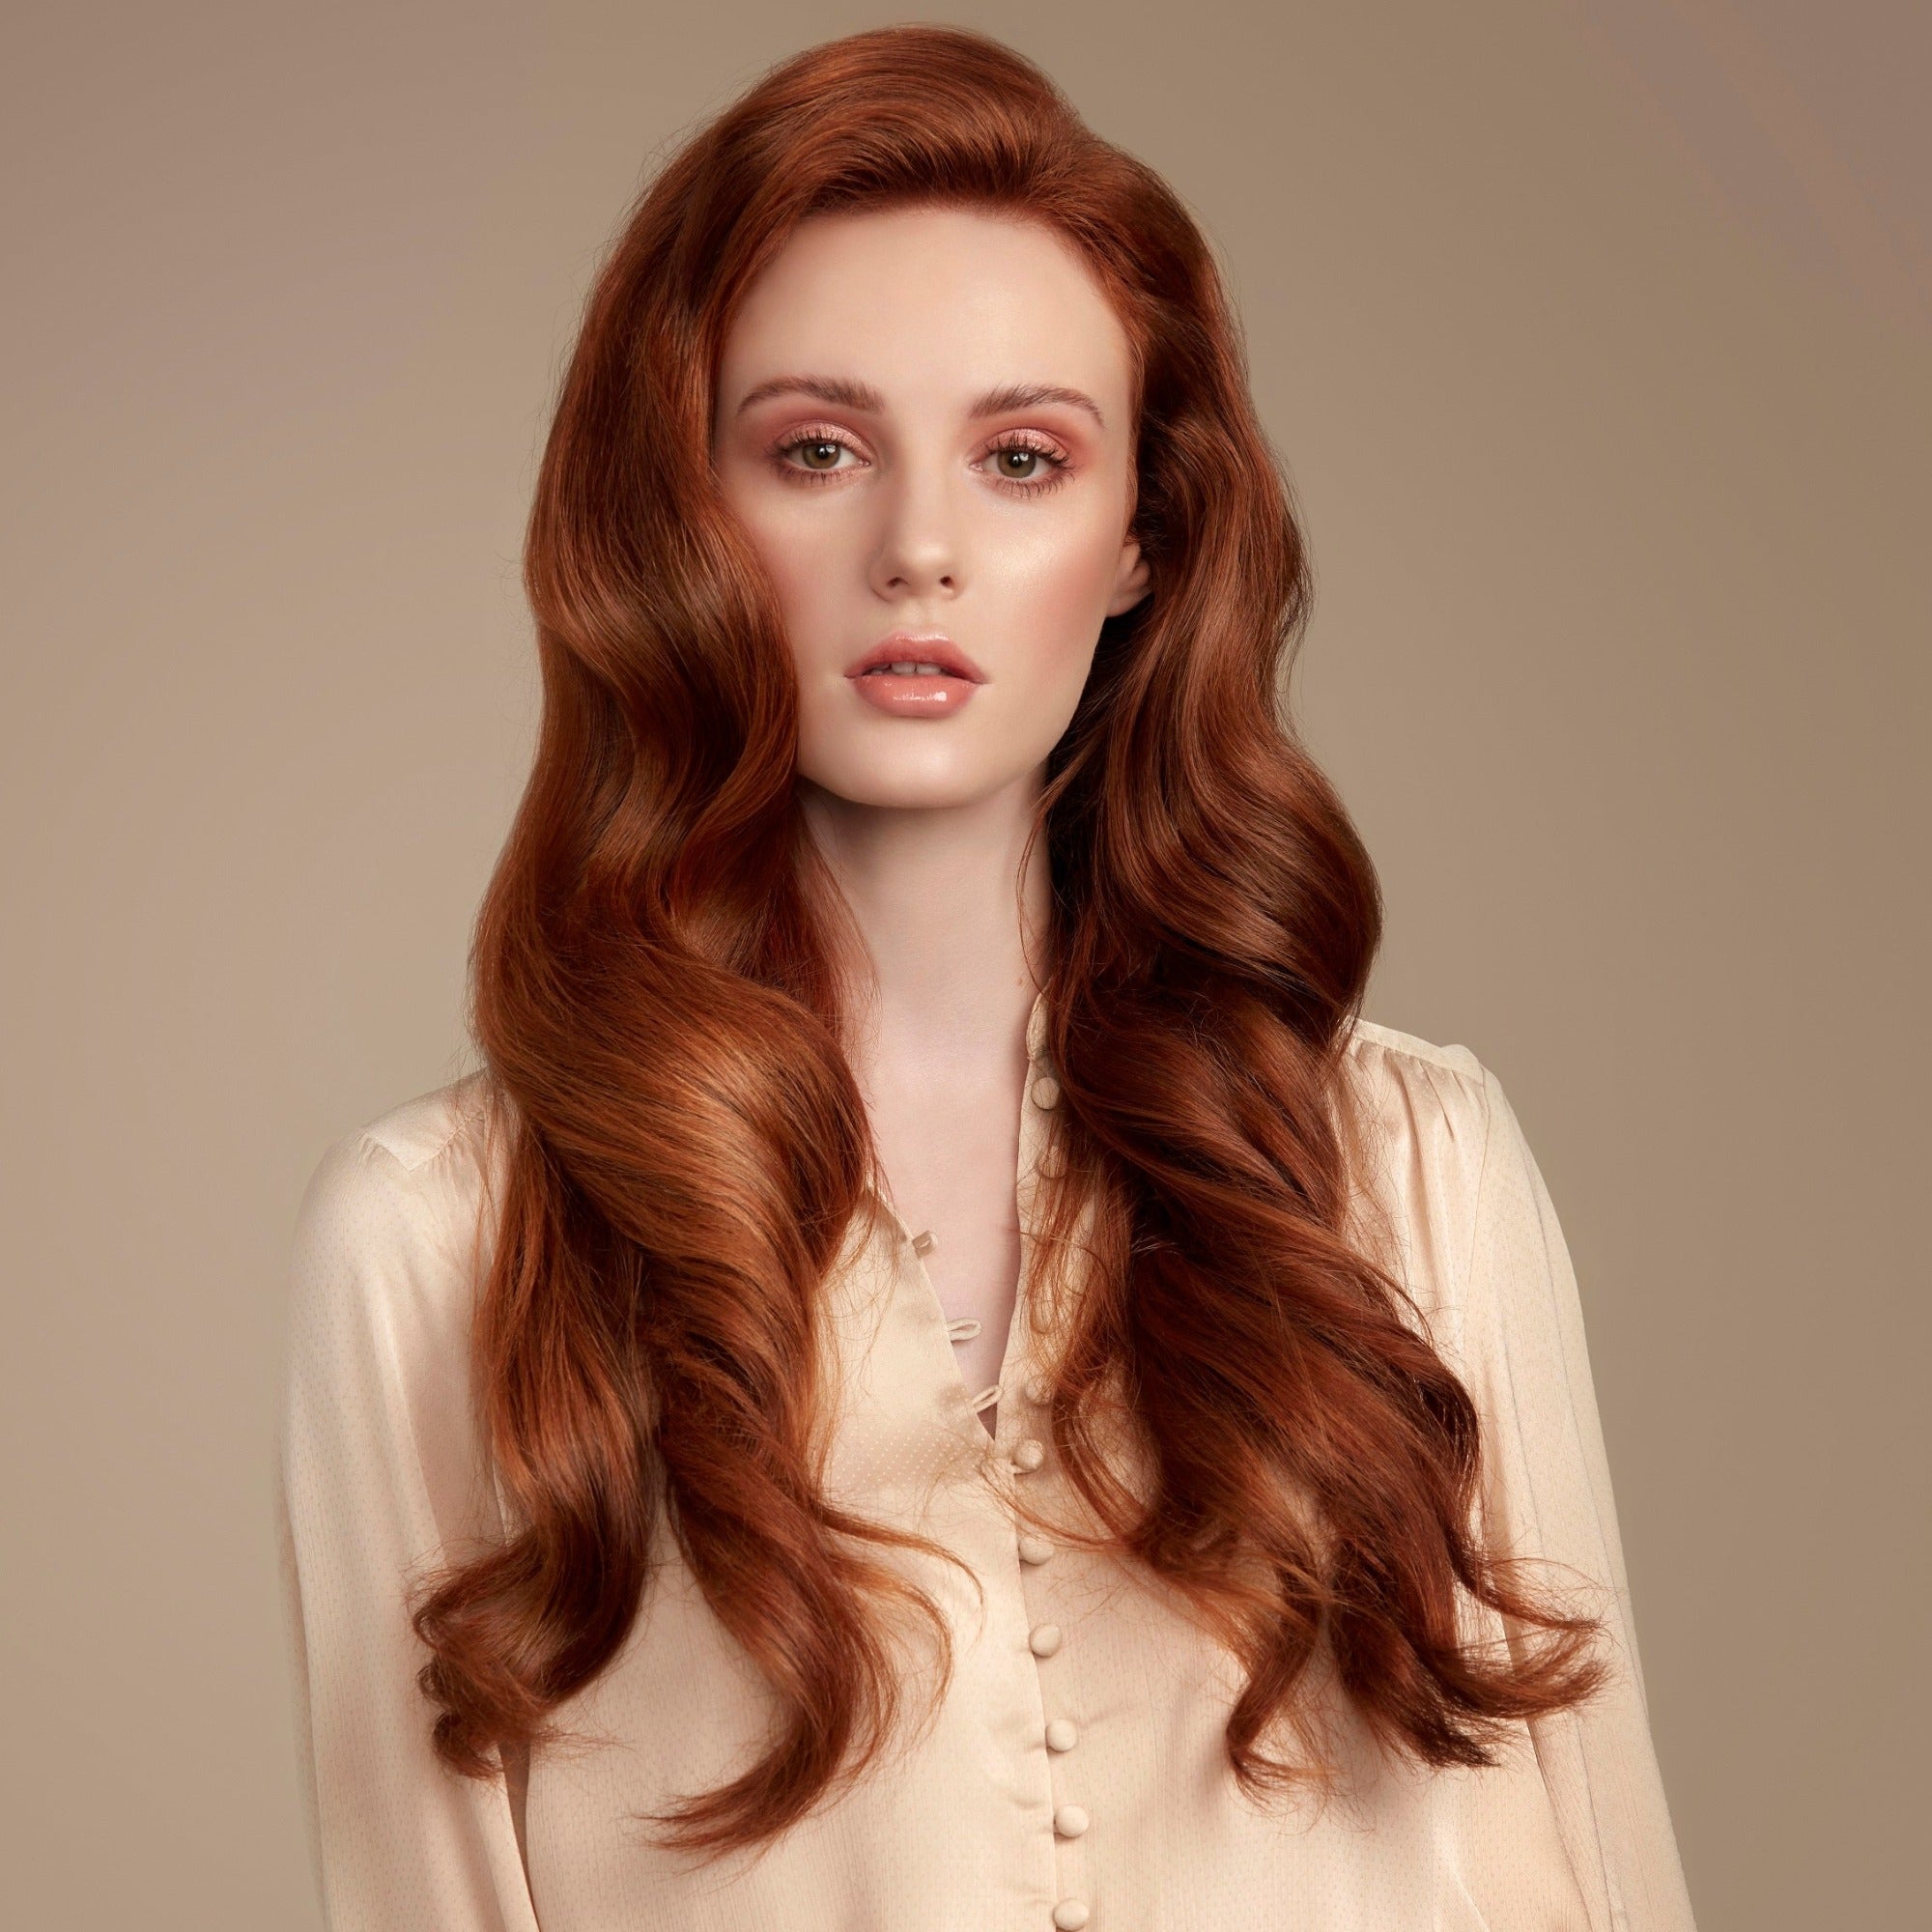 Female model with flowing long red wavy hair. She has a pale champagne coloured top. She is looking directly at the camera.. She has super shiny long wavy hair with lots of volume from a weekly use of Moo and Yoo Mask.